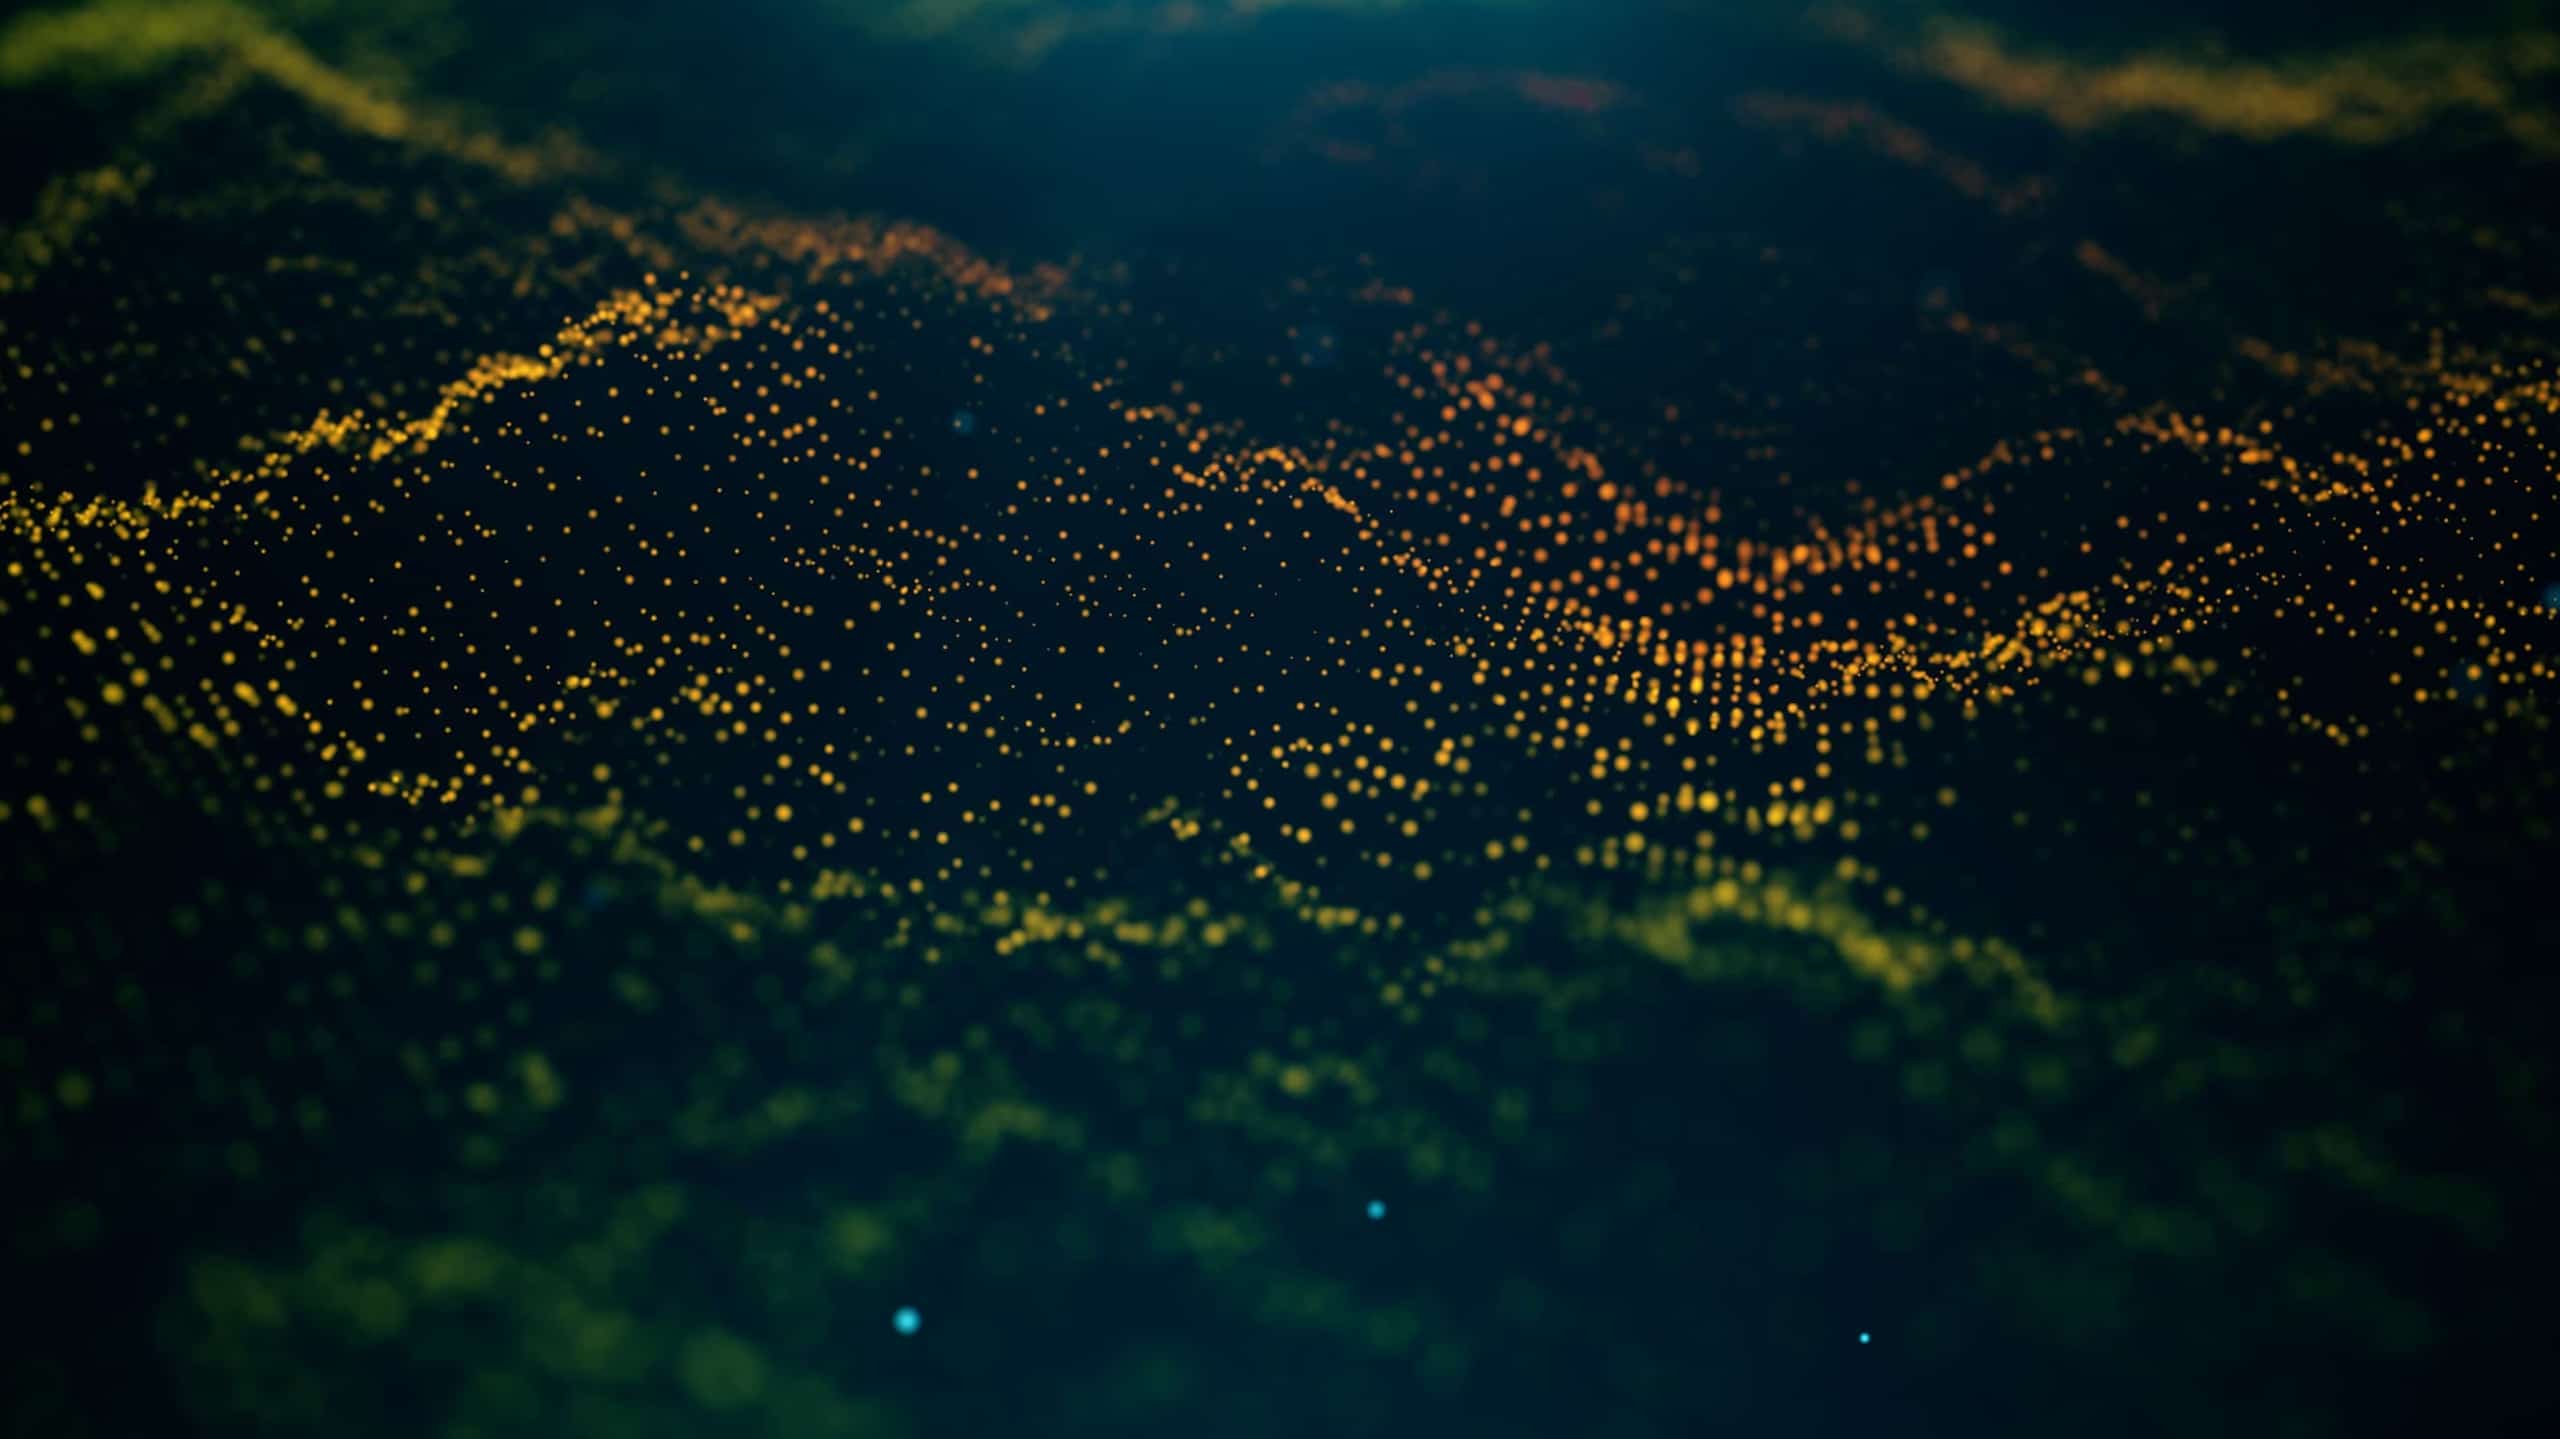 A digital representation of a landscape at night highlighted by numerous glowing yellow and orange dots, creating a wave-like pattern of illuminated terrain.